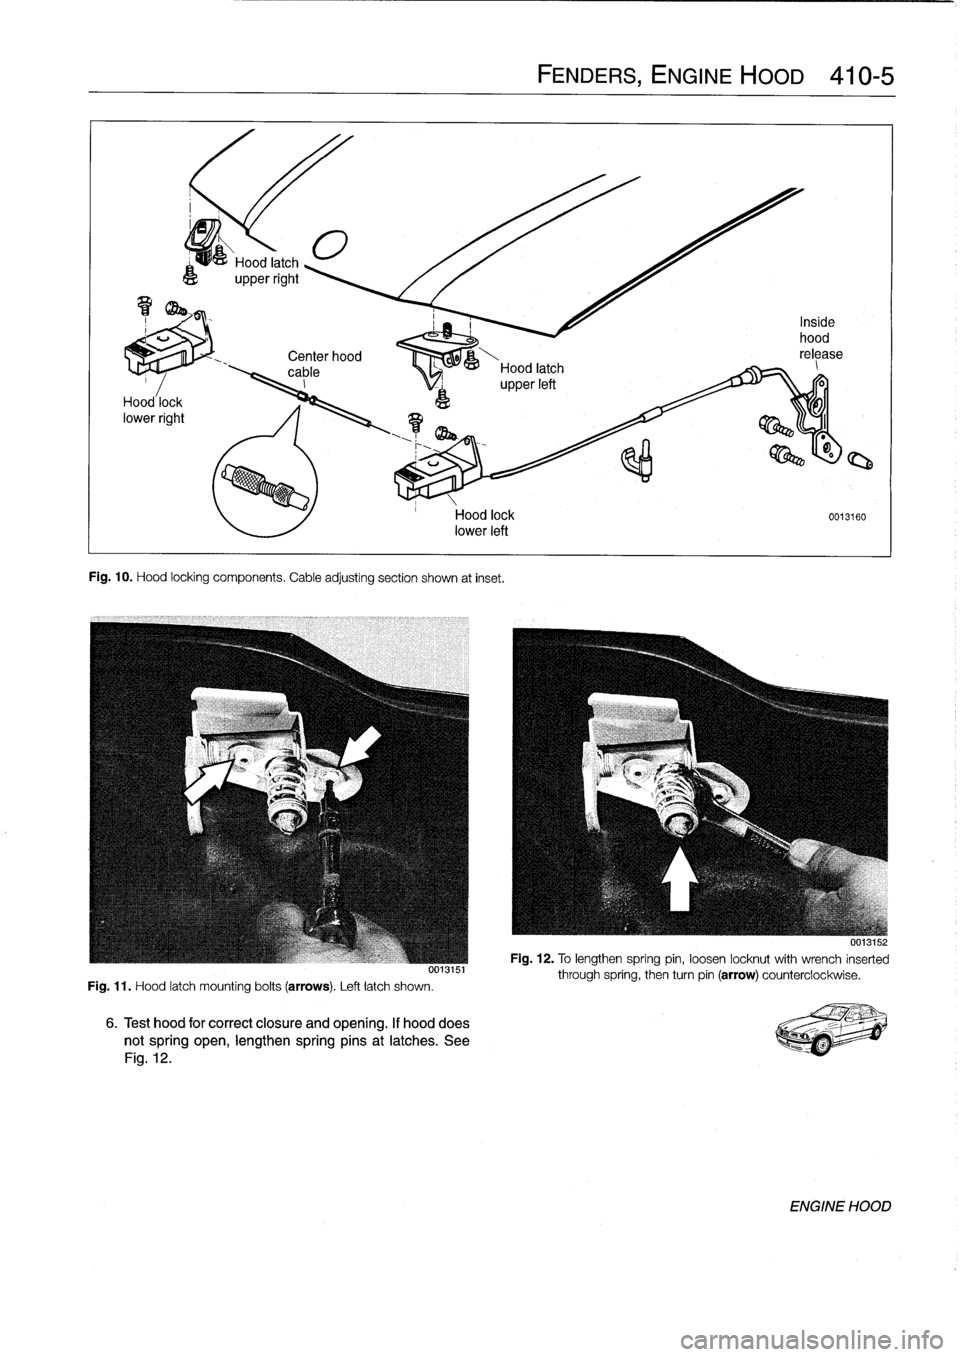 BMW 325i 1998 E36 Workshop Manual 
Center
hood

	

,
00--&---
cable

	

Hood
latch
_
I

	

upperleft

Fig
.
10
.
Hood
locking
components
.
Cable
adjusting
section
shown
at
inset
.

Fig
.
11
.
Hood
latch
mounting
bolts
(arrows)
.
Left
